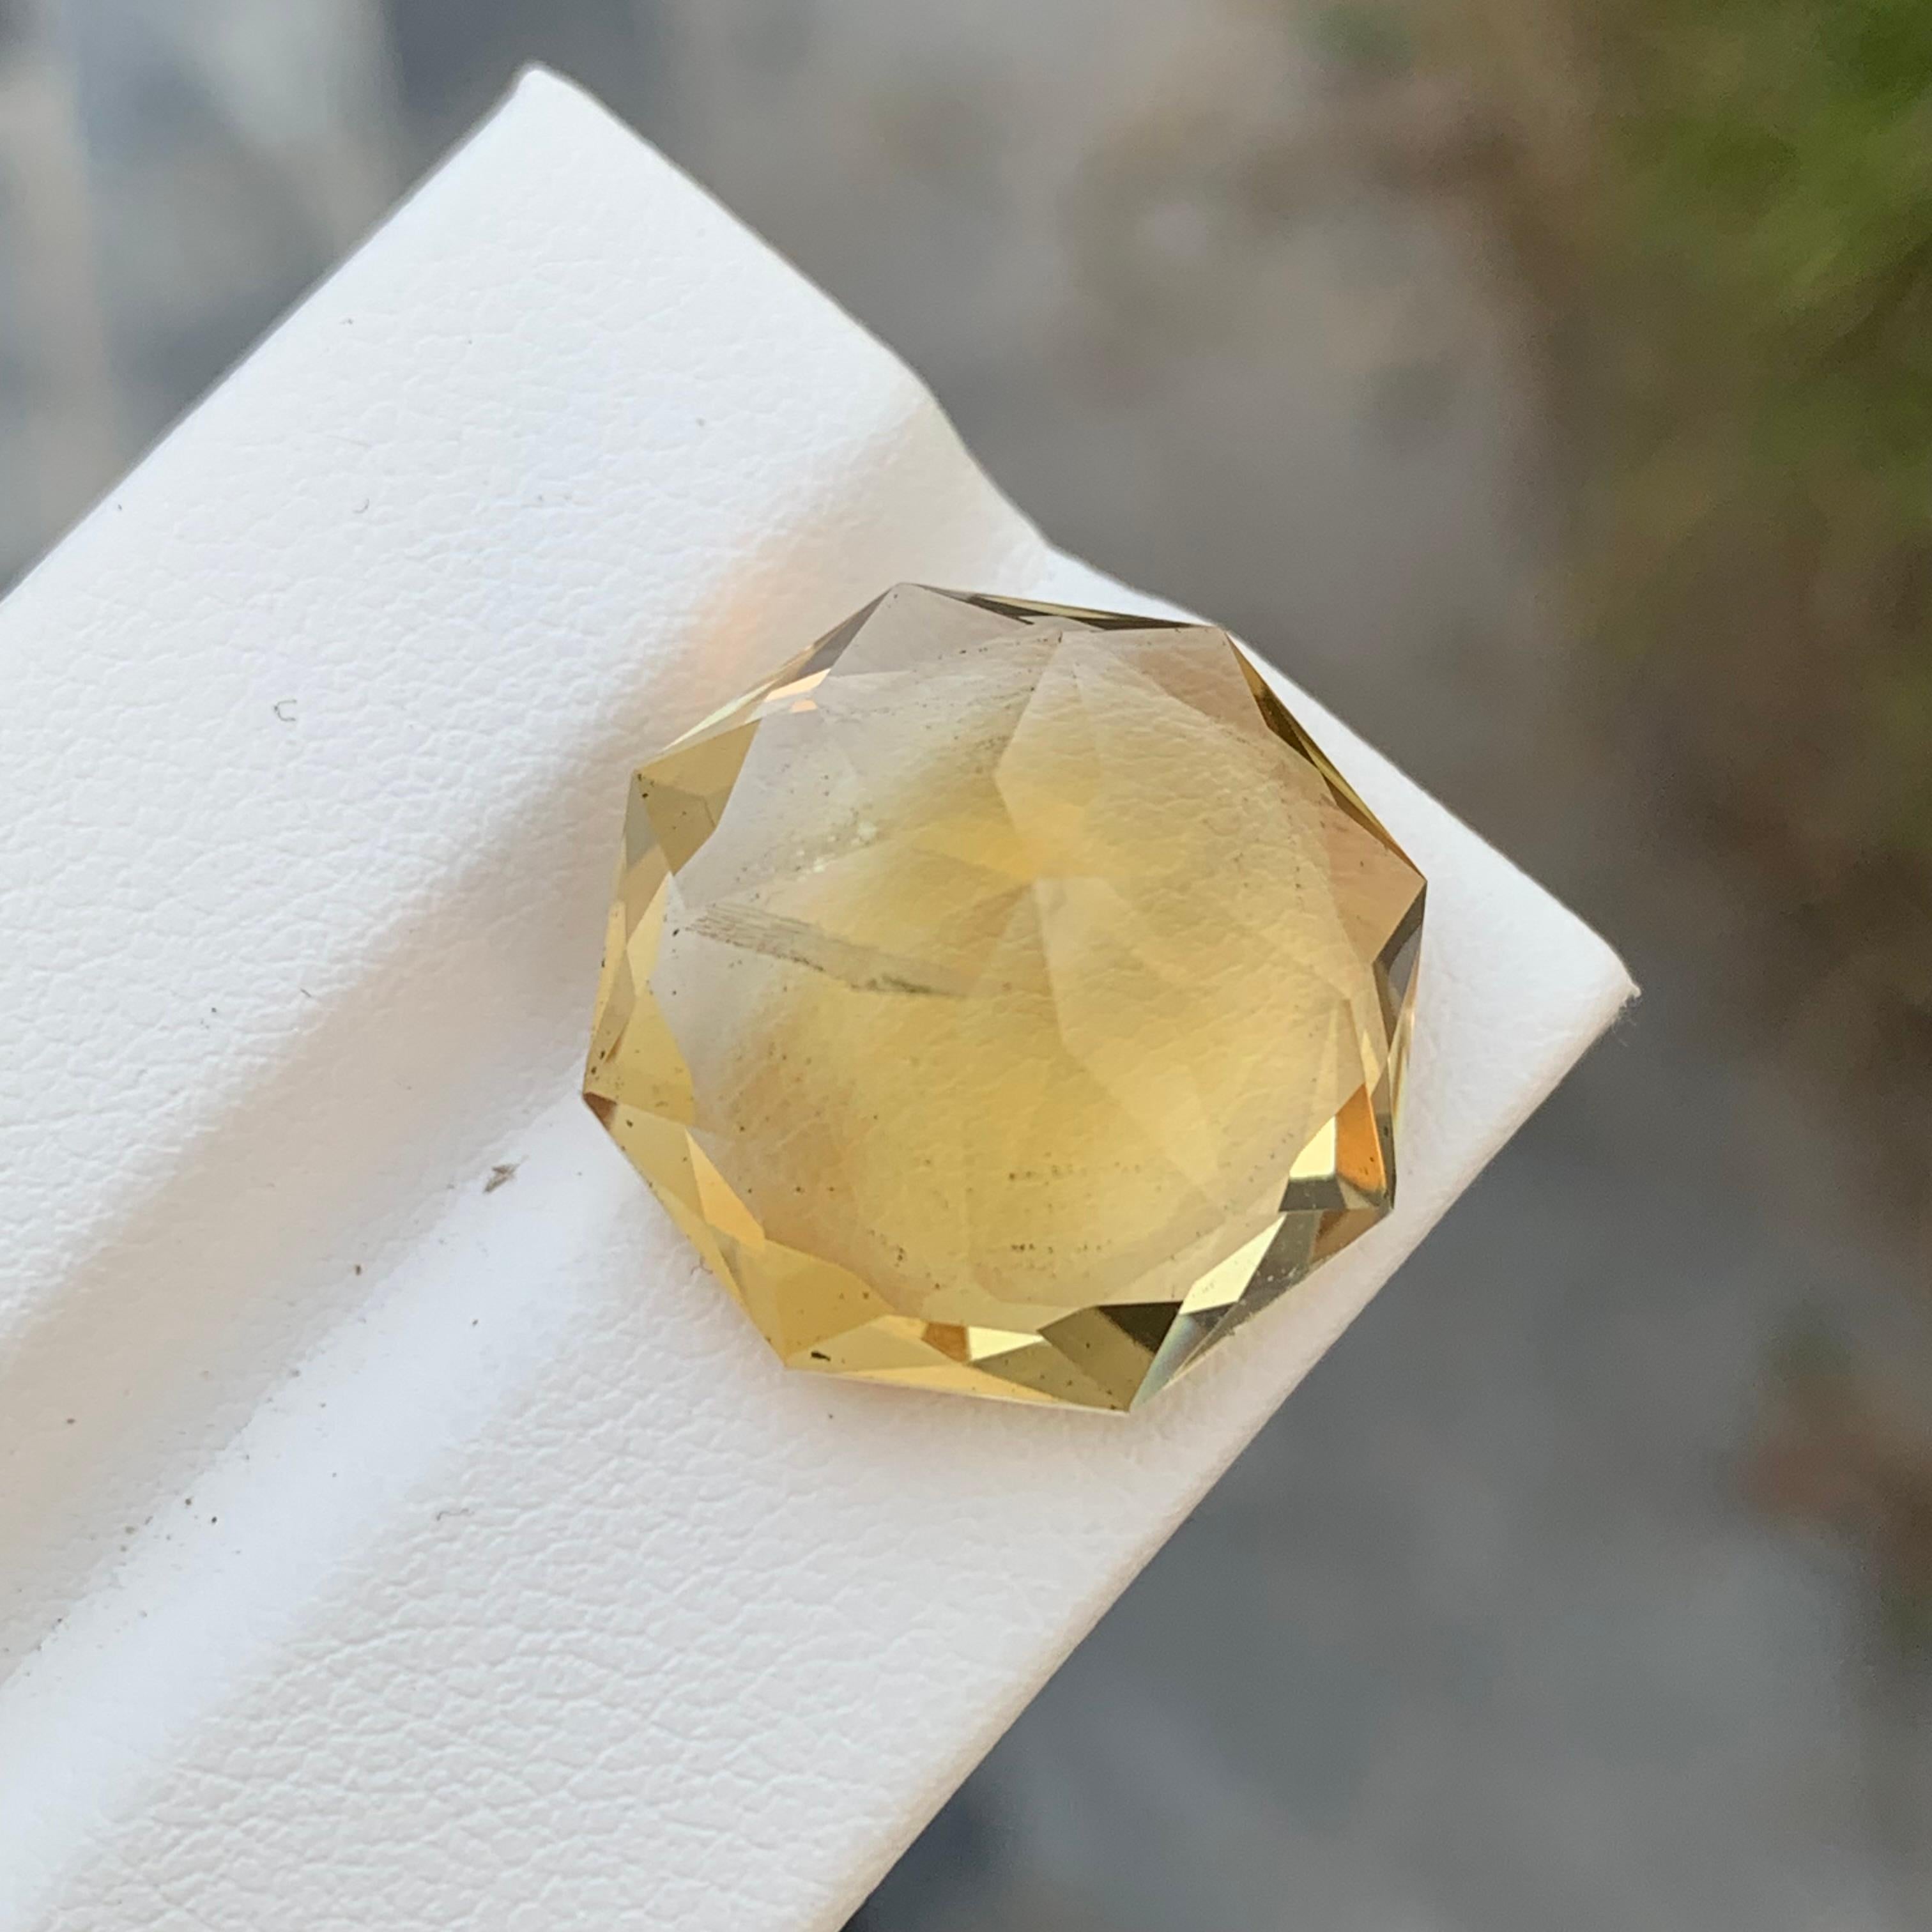 Loose Citrine 
Weight: 20.05 Carats 
Dimension: 17.9x17.9x11.7 Mm
Origin: Brazil
Shape: Octagon 
Treatment: Non
Certificate; On Customer Demand 
Citrine is a vibrant yellow gemstone, belonging to the quartz family. Its name is derived from the